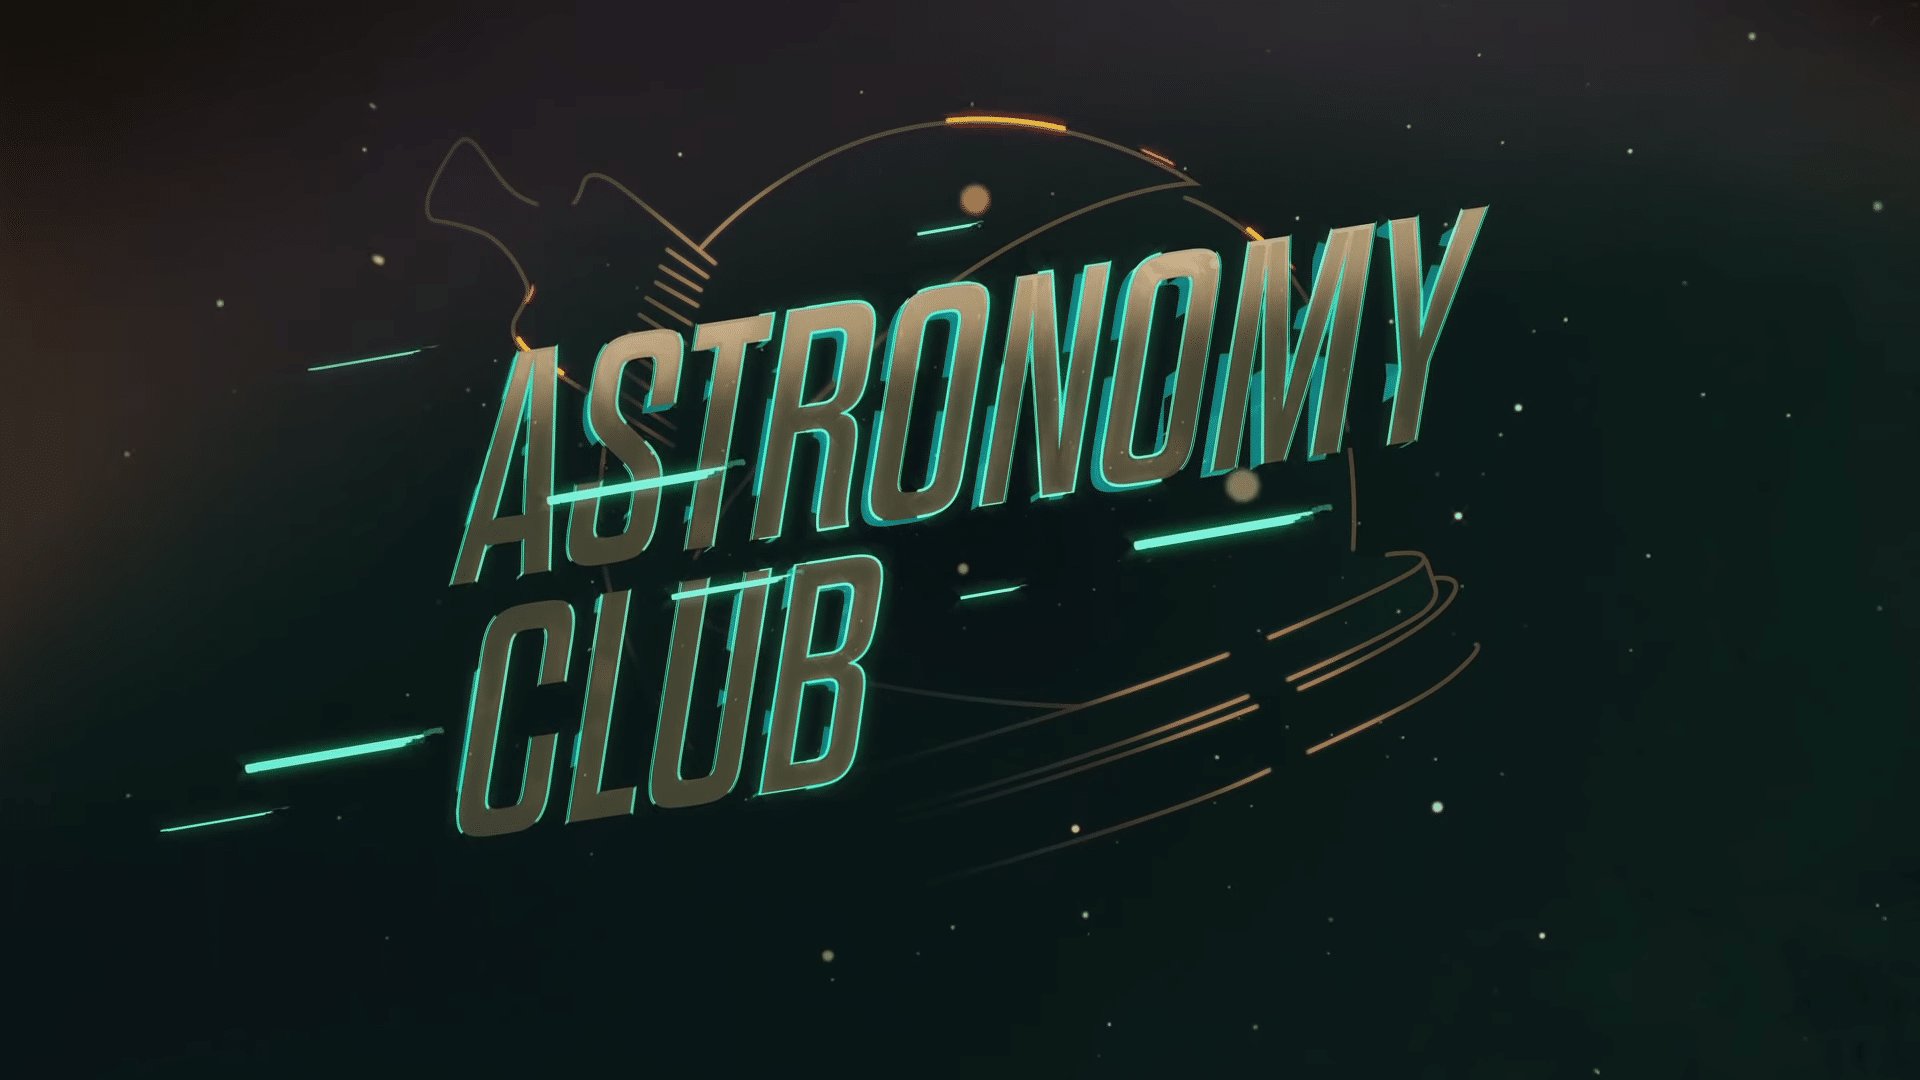 Astronomy Club The Sketch Show Netflix Trailer, Netflix Comedy Series, Coming to Netflix in December 2019